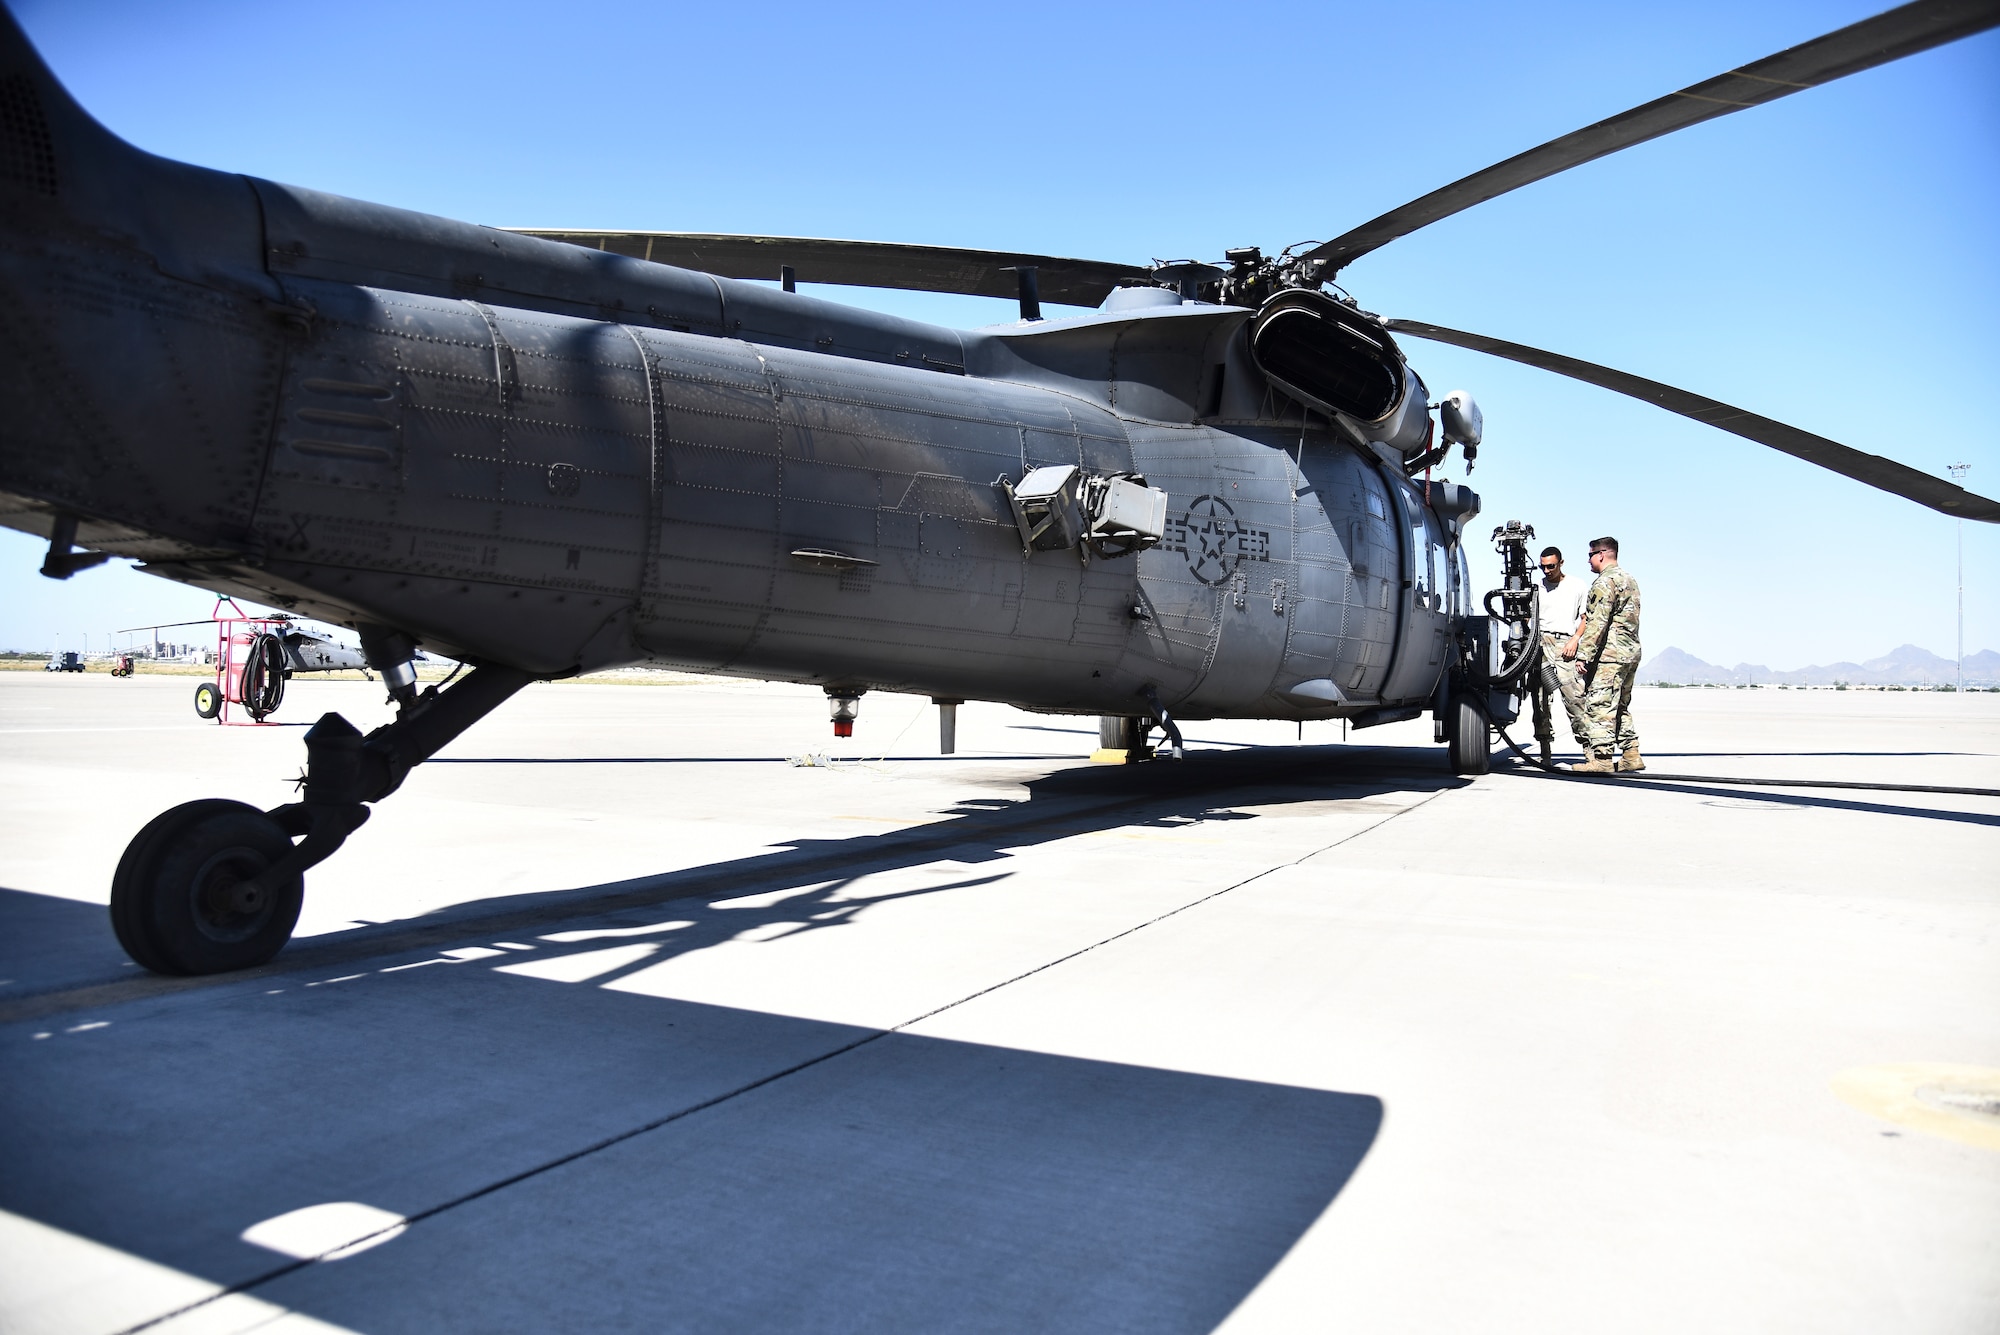 An instructor and student, assigned to the 372d Training Squadron, Detachment 11, examine a HH-60G Pavehawk weapons system at Davis-Monthan Air Force Base, Ariz., June 4, 2019. The 372d TRS, Det. 11, consists of 42 instructors responsible for training up to thousands of Airmen a year on different kinds of aircraft maintenance. (U.S. Air Force photo by Senior Airman Mya M. Crosby)